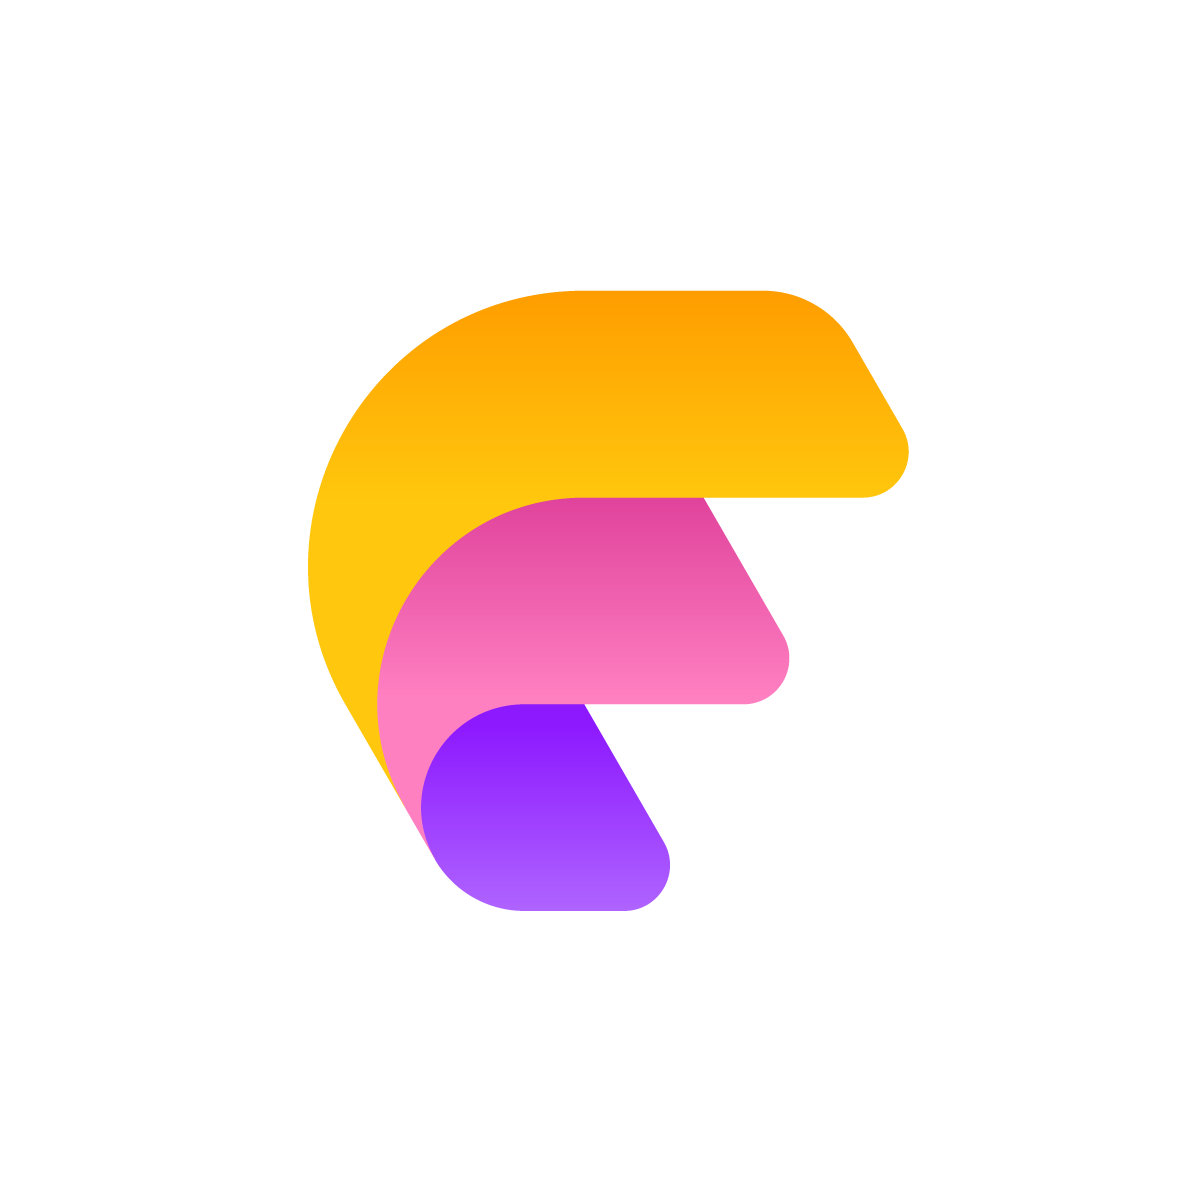 Abstract F Logo: A modern logo created from three layered shapes forming the letter F with rounded corners